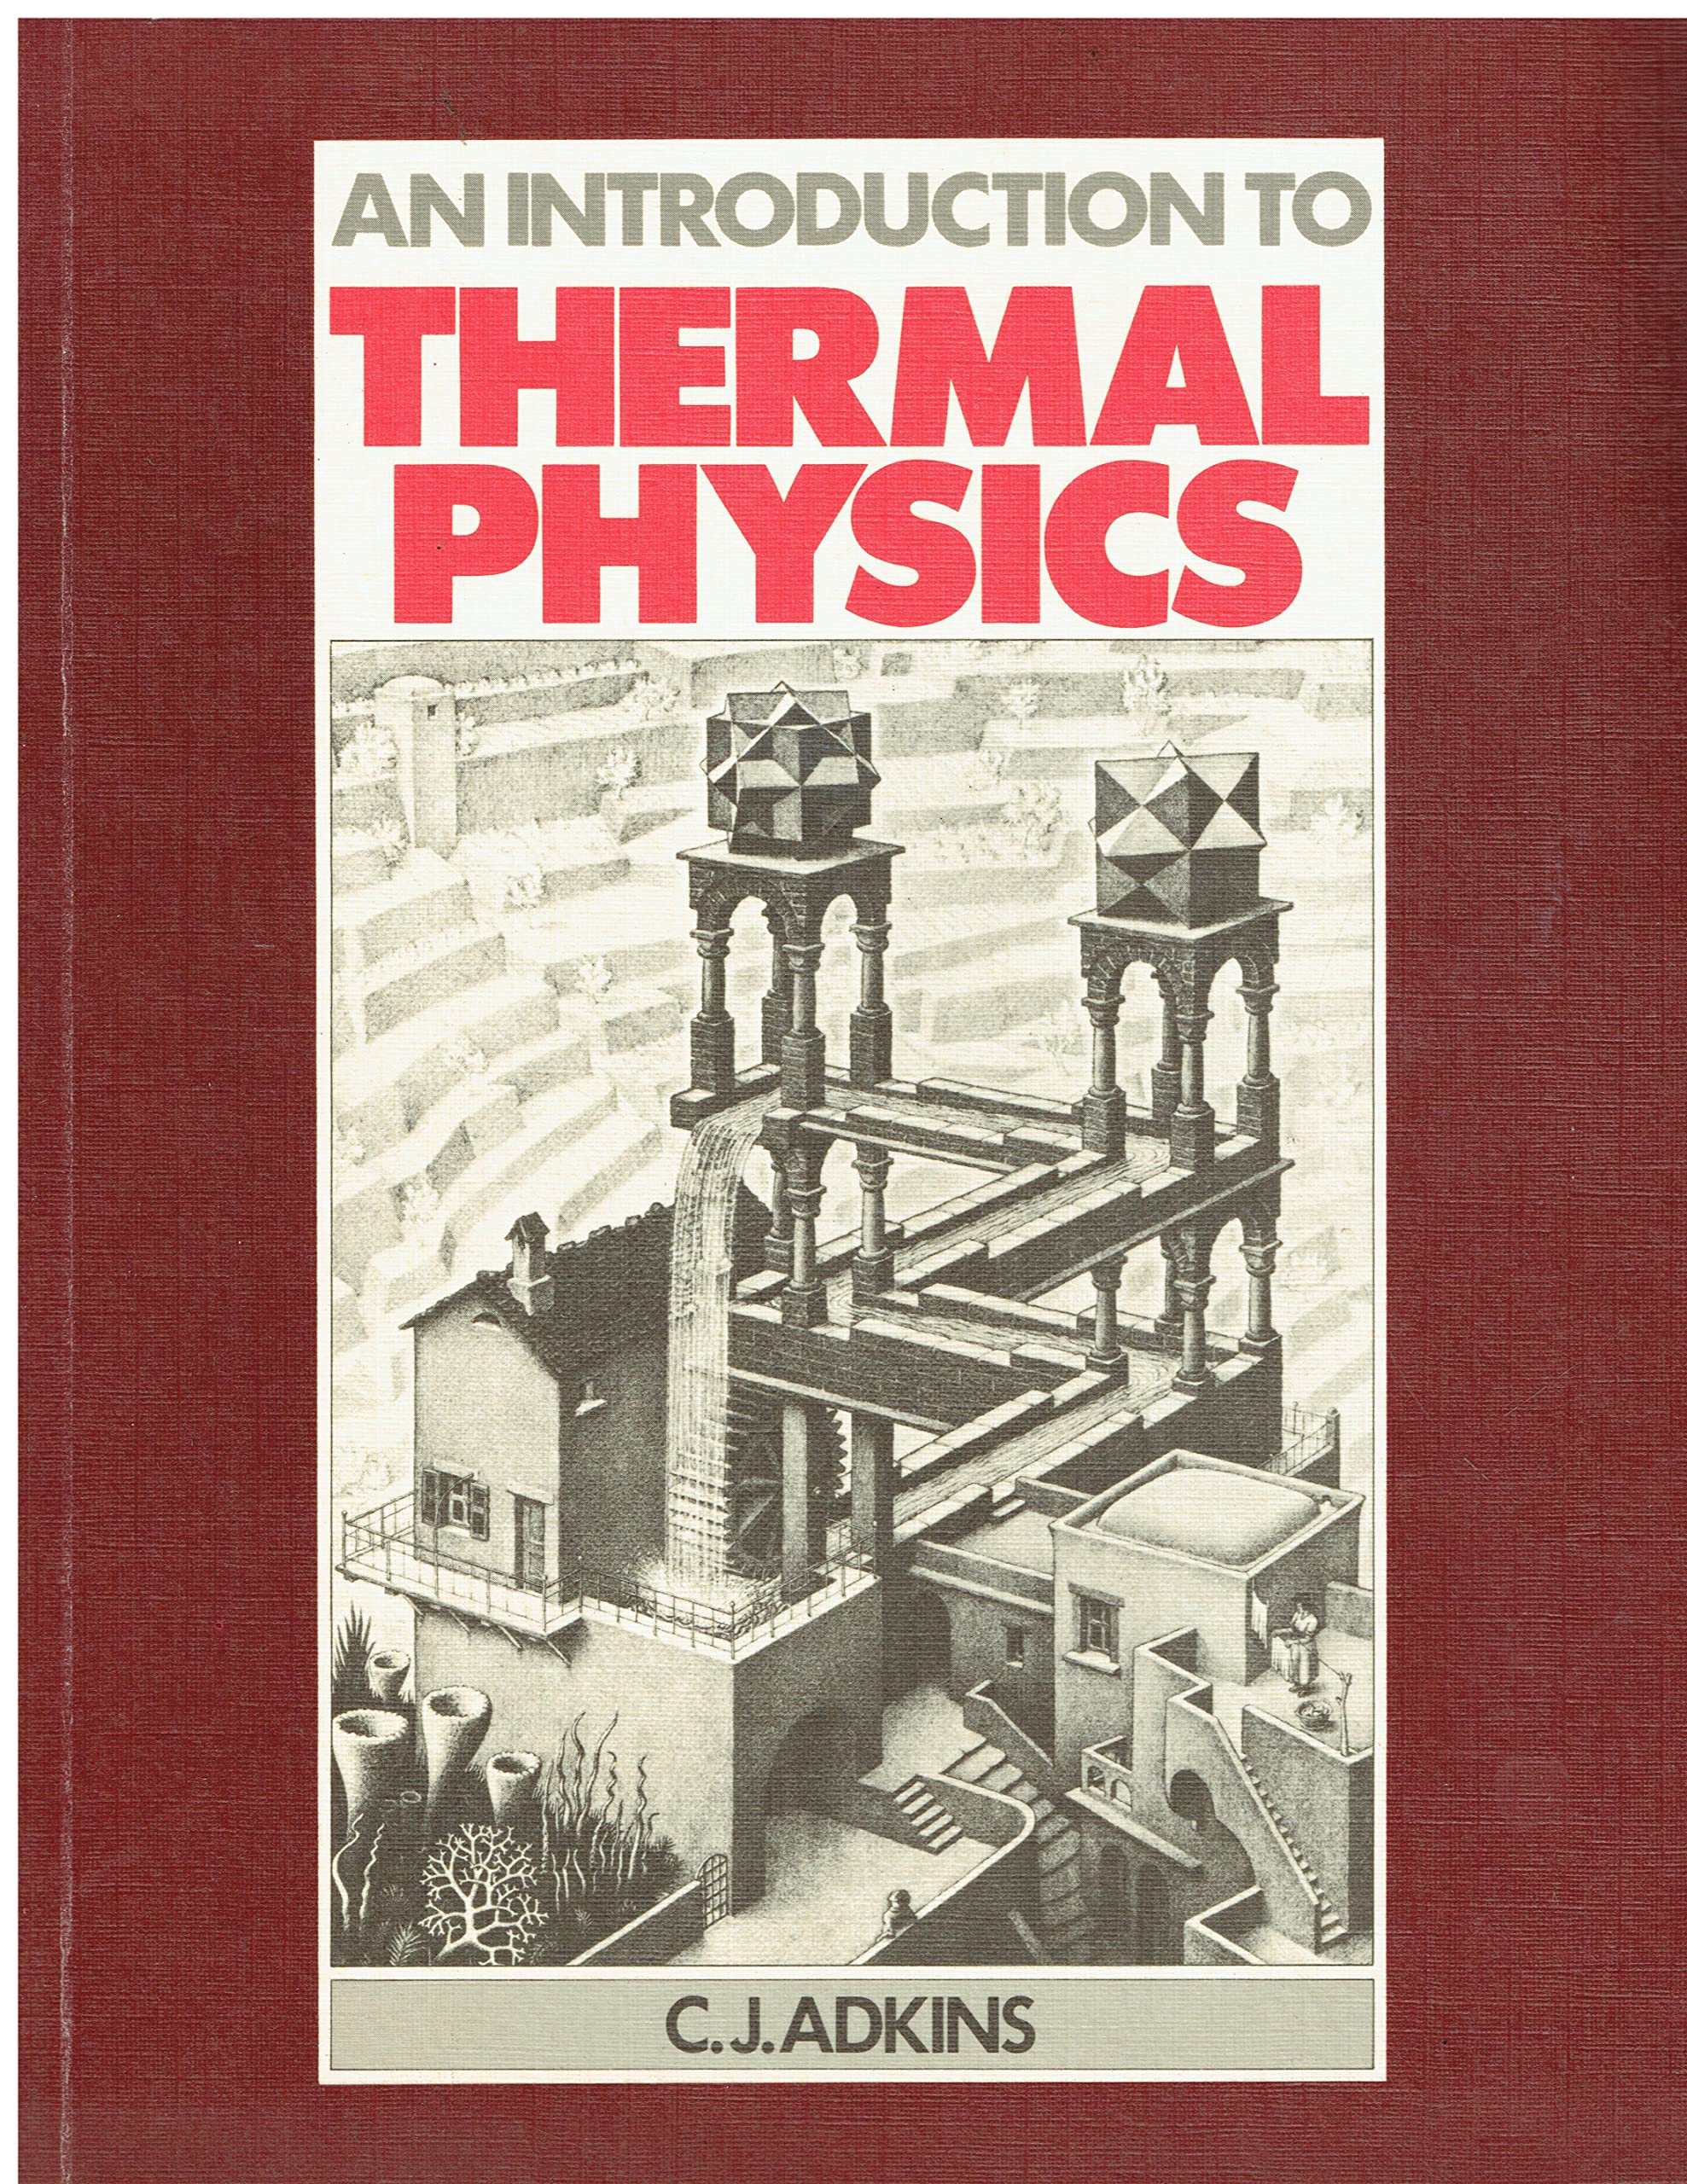 Introduction to Thermal Physics - Adkins, C. J.